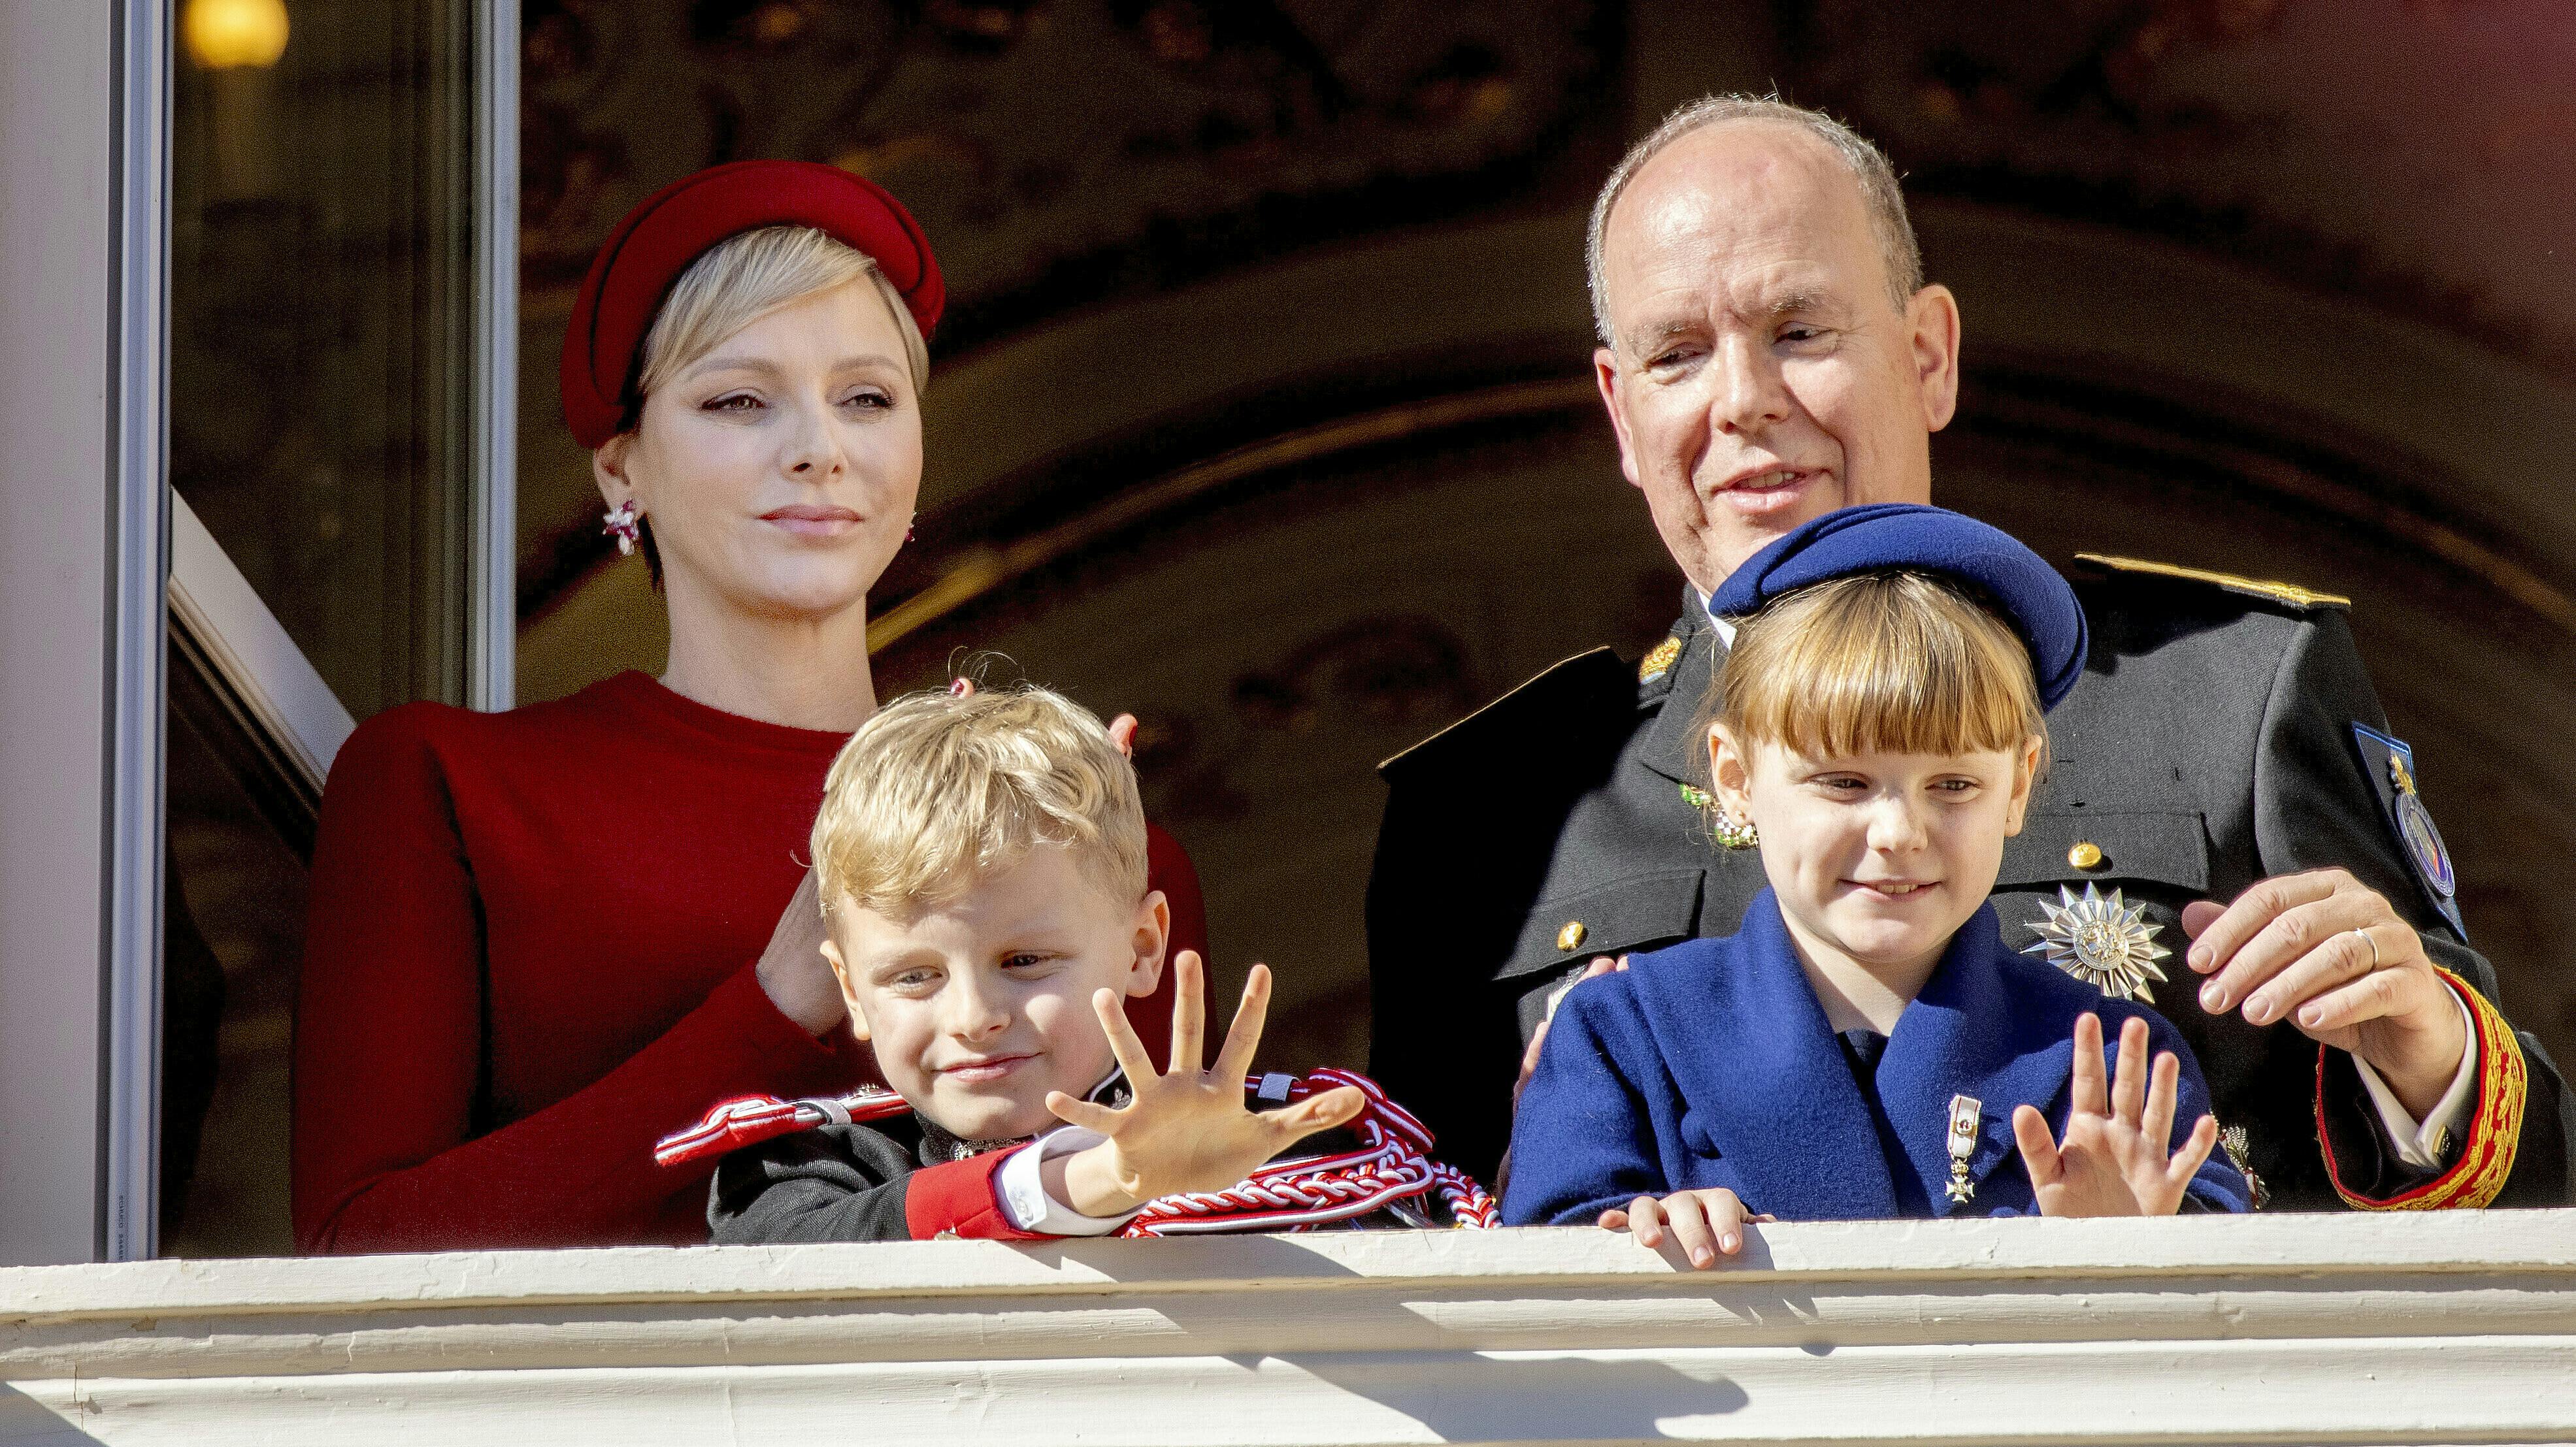 Princess Caroline of Hanover, Andrea Casiraghi and Charlotte Casiraghi of Monaco on the balcony of the Princely Palace in Monaco-Ville, on November 19, 2023, during the Monaco national day celebrations Photo by: Albert Nieboer/picture-alliance/dpa/AP Images